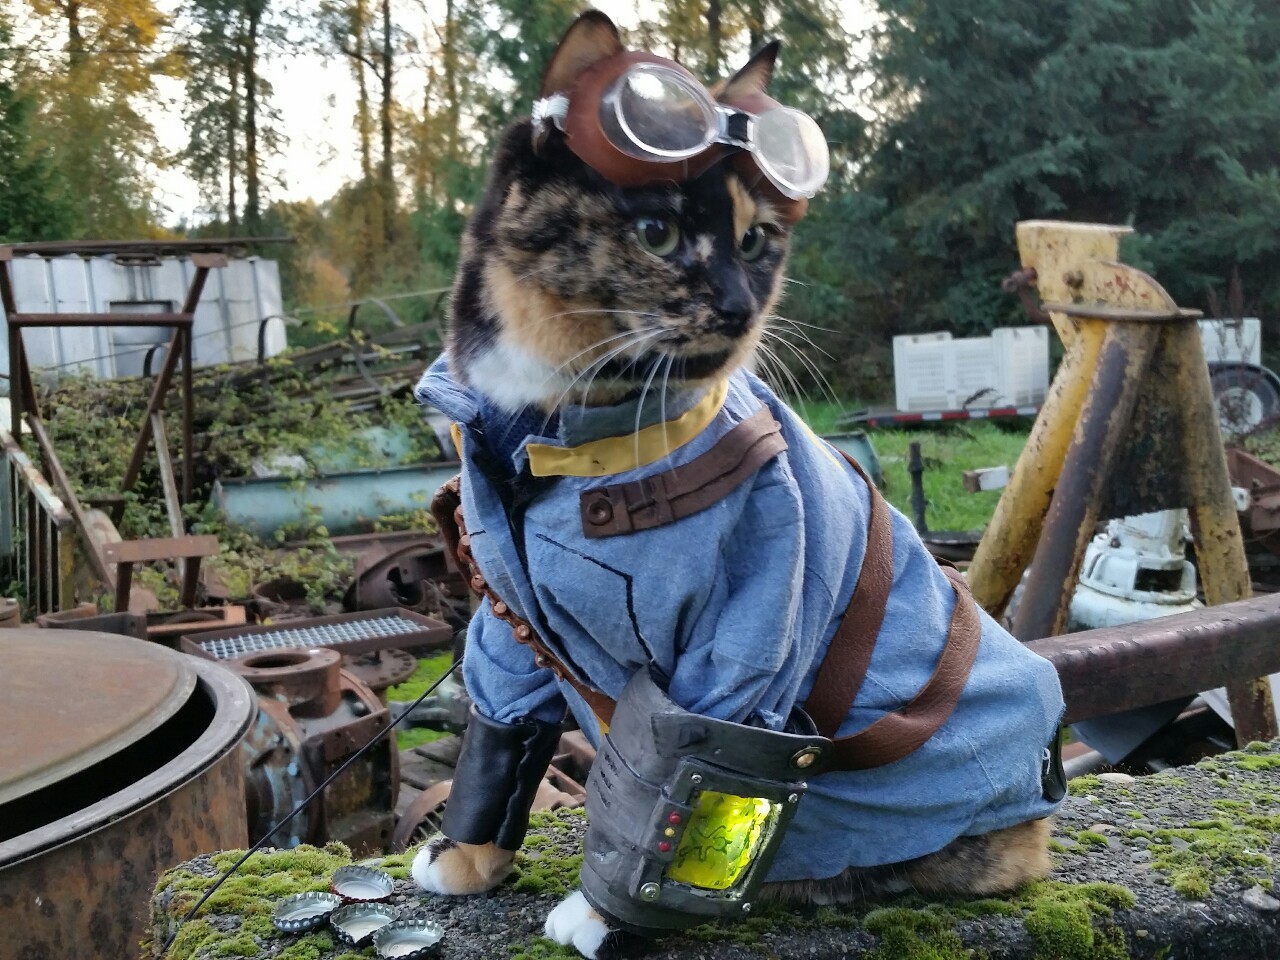 The results are in!
Vault Cat was voted #1 in our Best of Cat Cosplay Tournament!
You Fallout Fans certainly represented well! As such we’ll be doing something special with Vault Cat in the coming Months for winning!